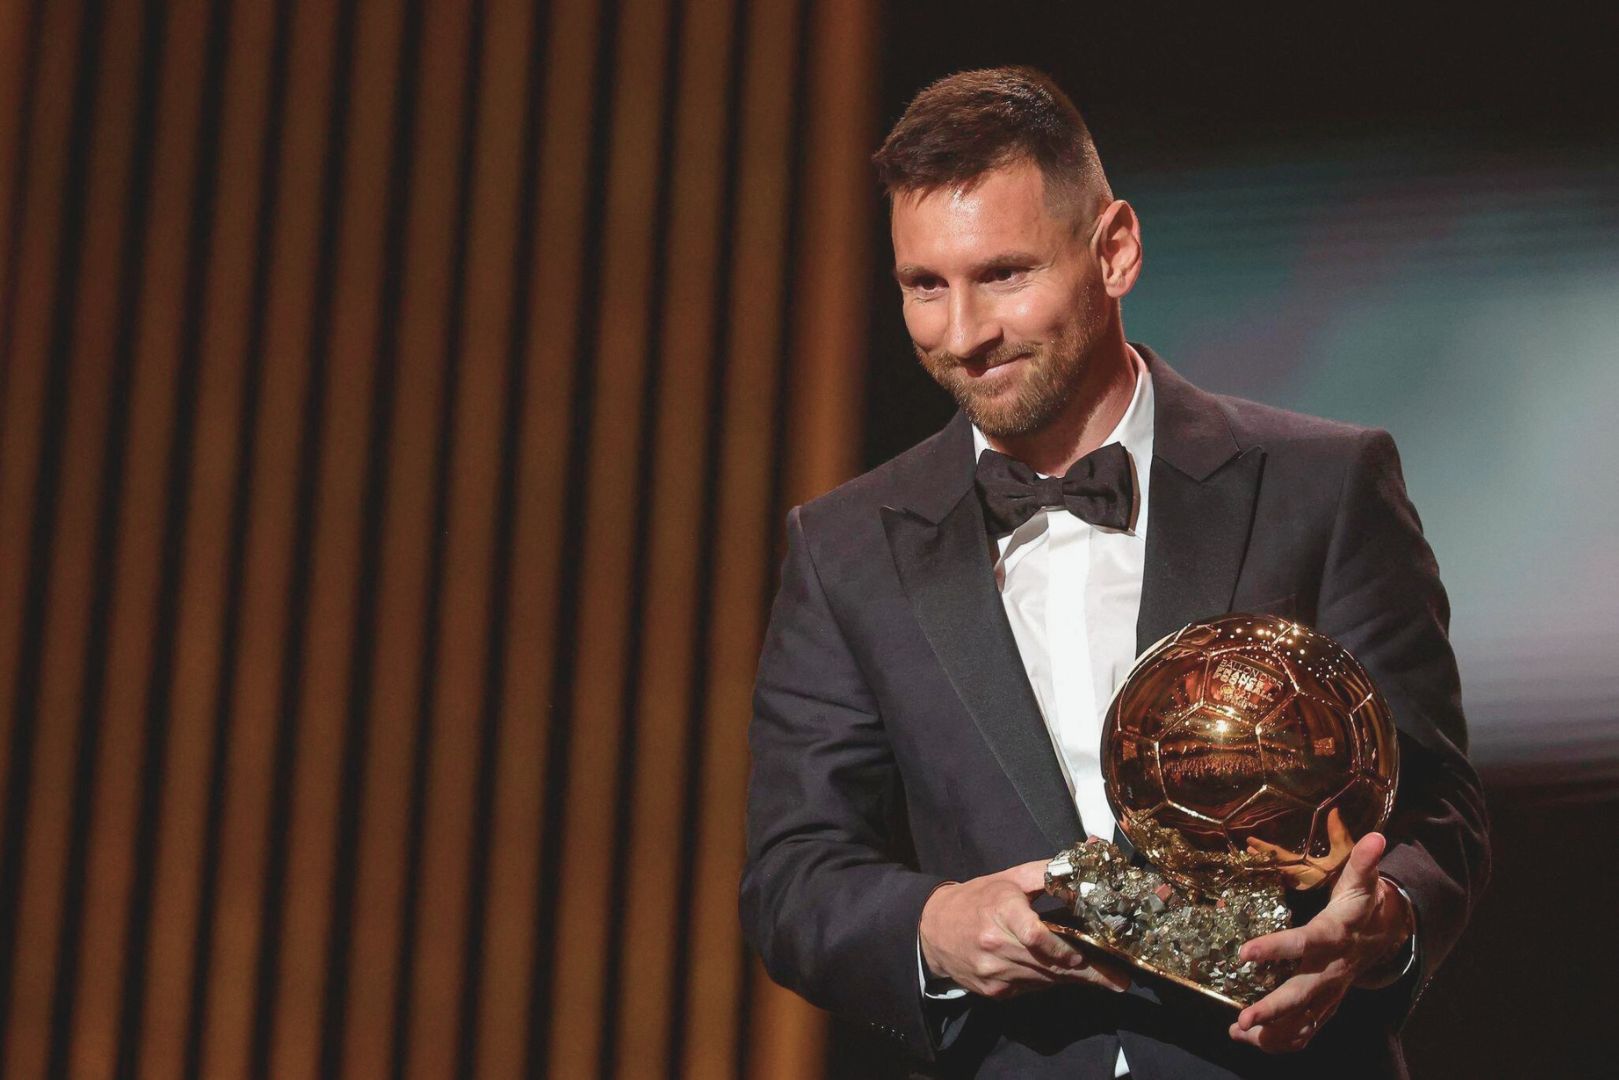 Inter Miami CF's Argentine forward and FC Barcelona legend Lionel Messi receives his 8th Ballon d'Or award during the 2023 Ballon d'Or France Football award ceremony at the Theatre du Chatelet in Paris on October 30, 2023.